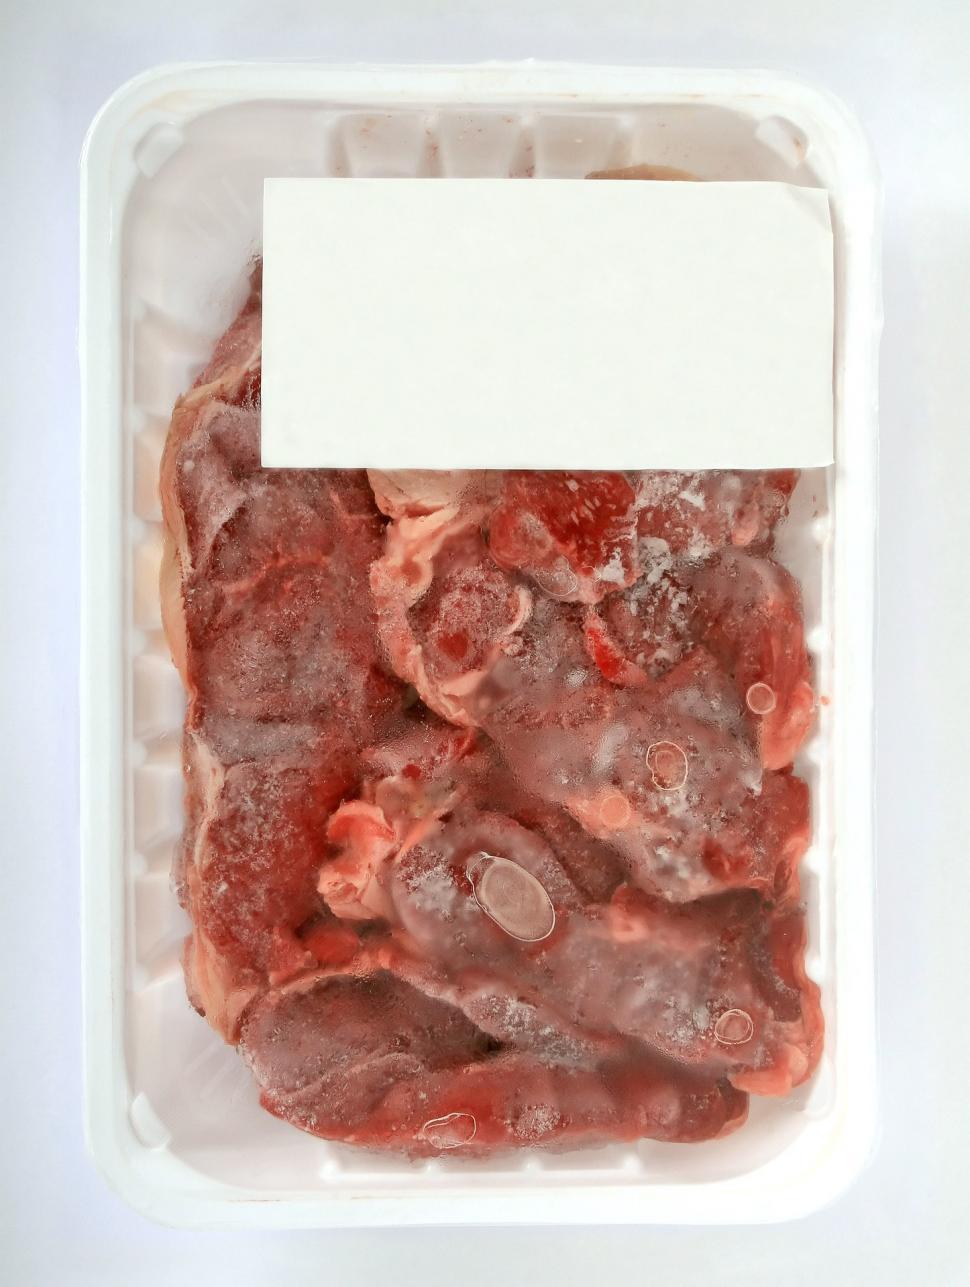 Free Image of Plastic Container Filled With Meat and White Label 